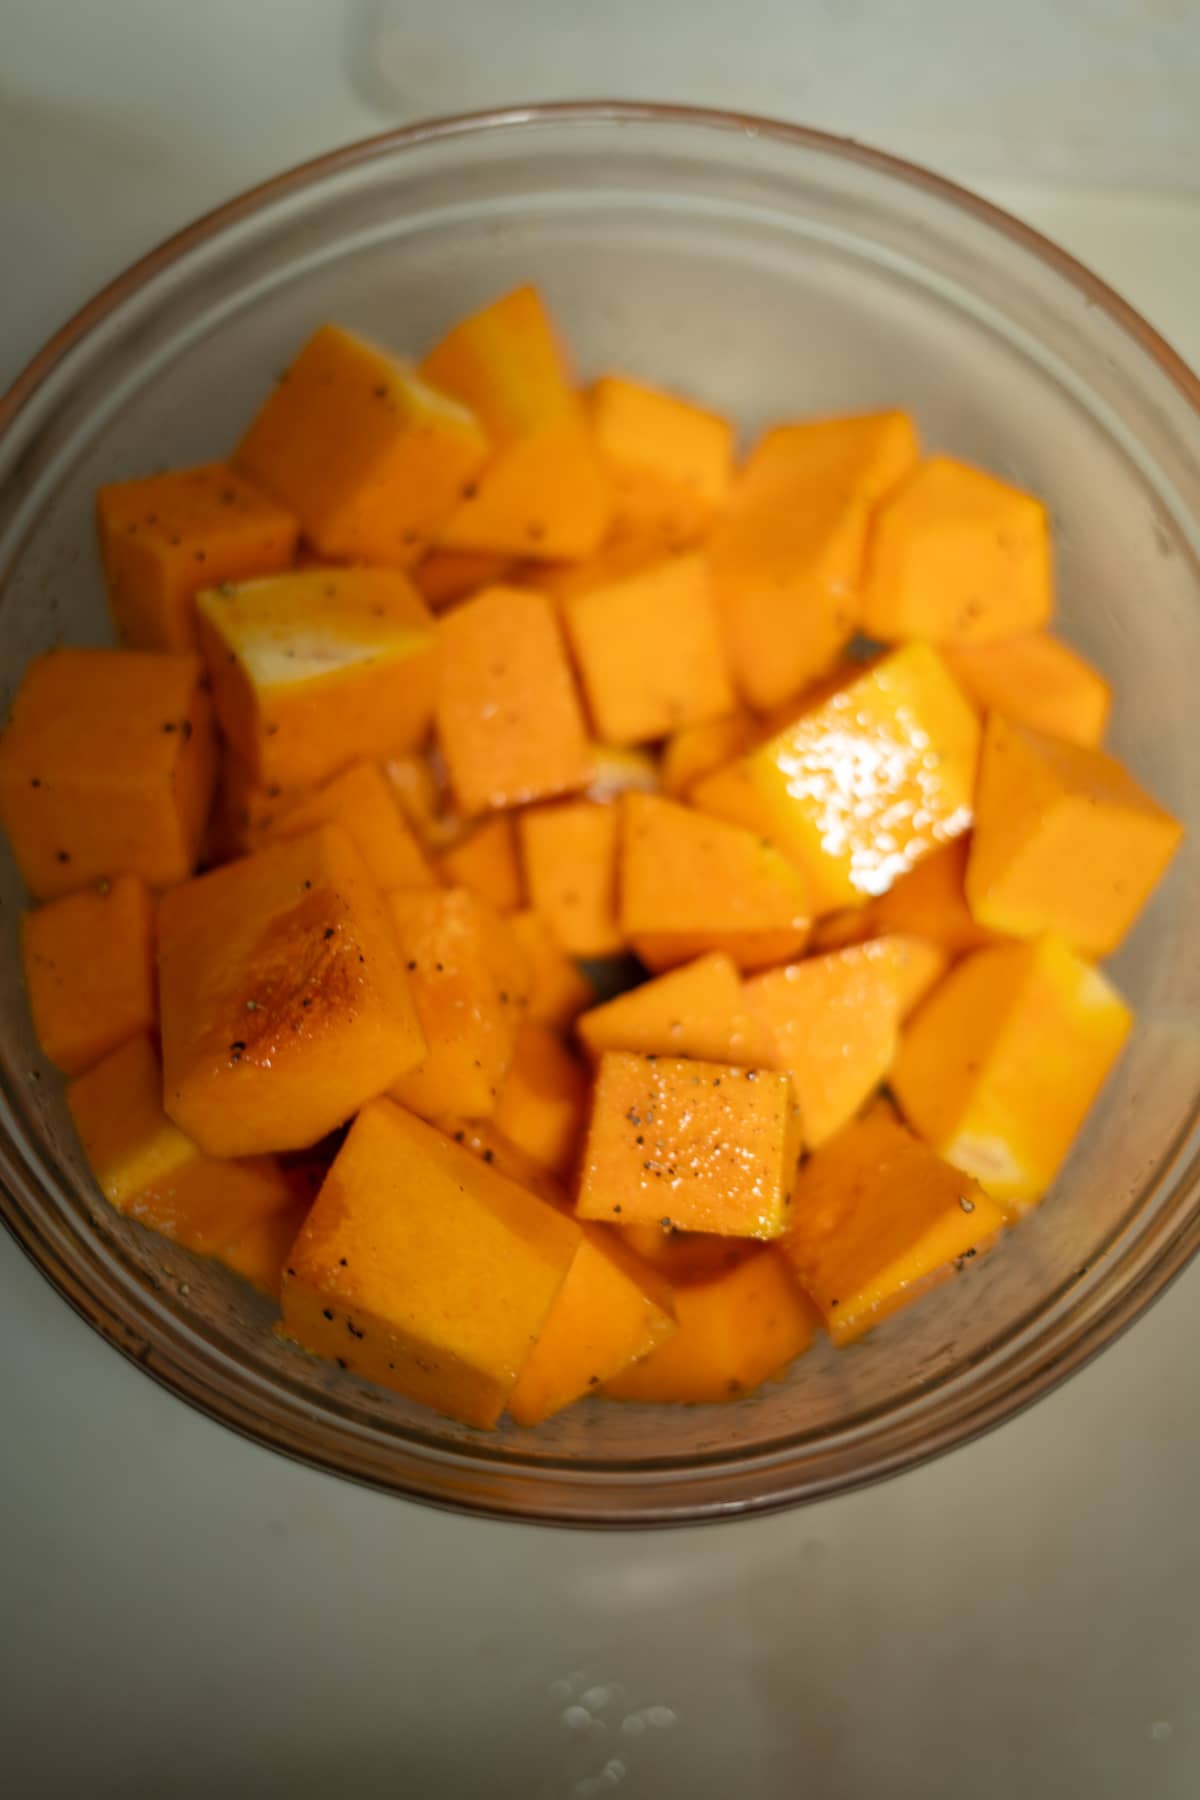 A bowl of cubed squash sitting on a counter.